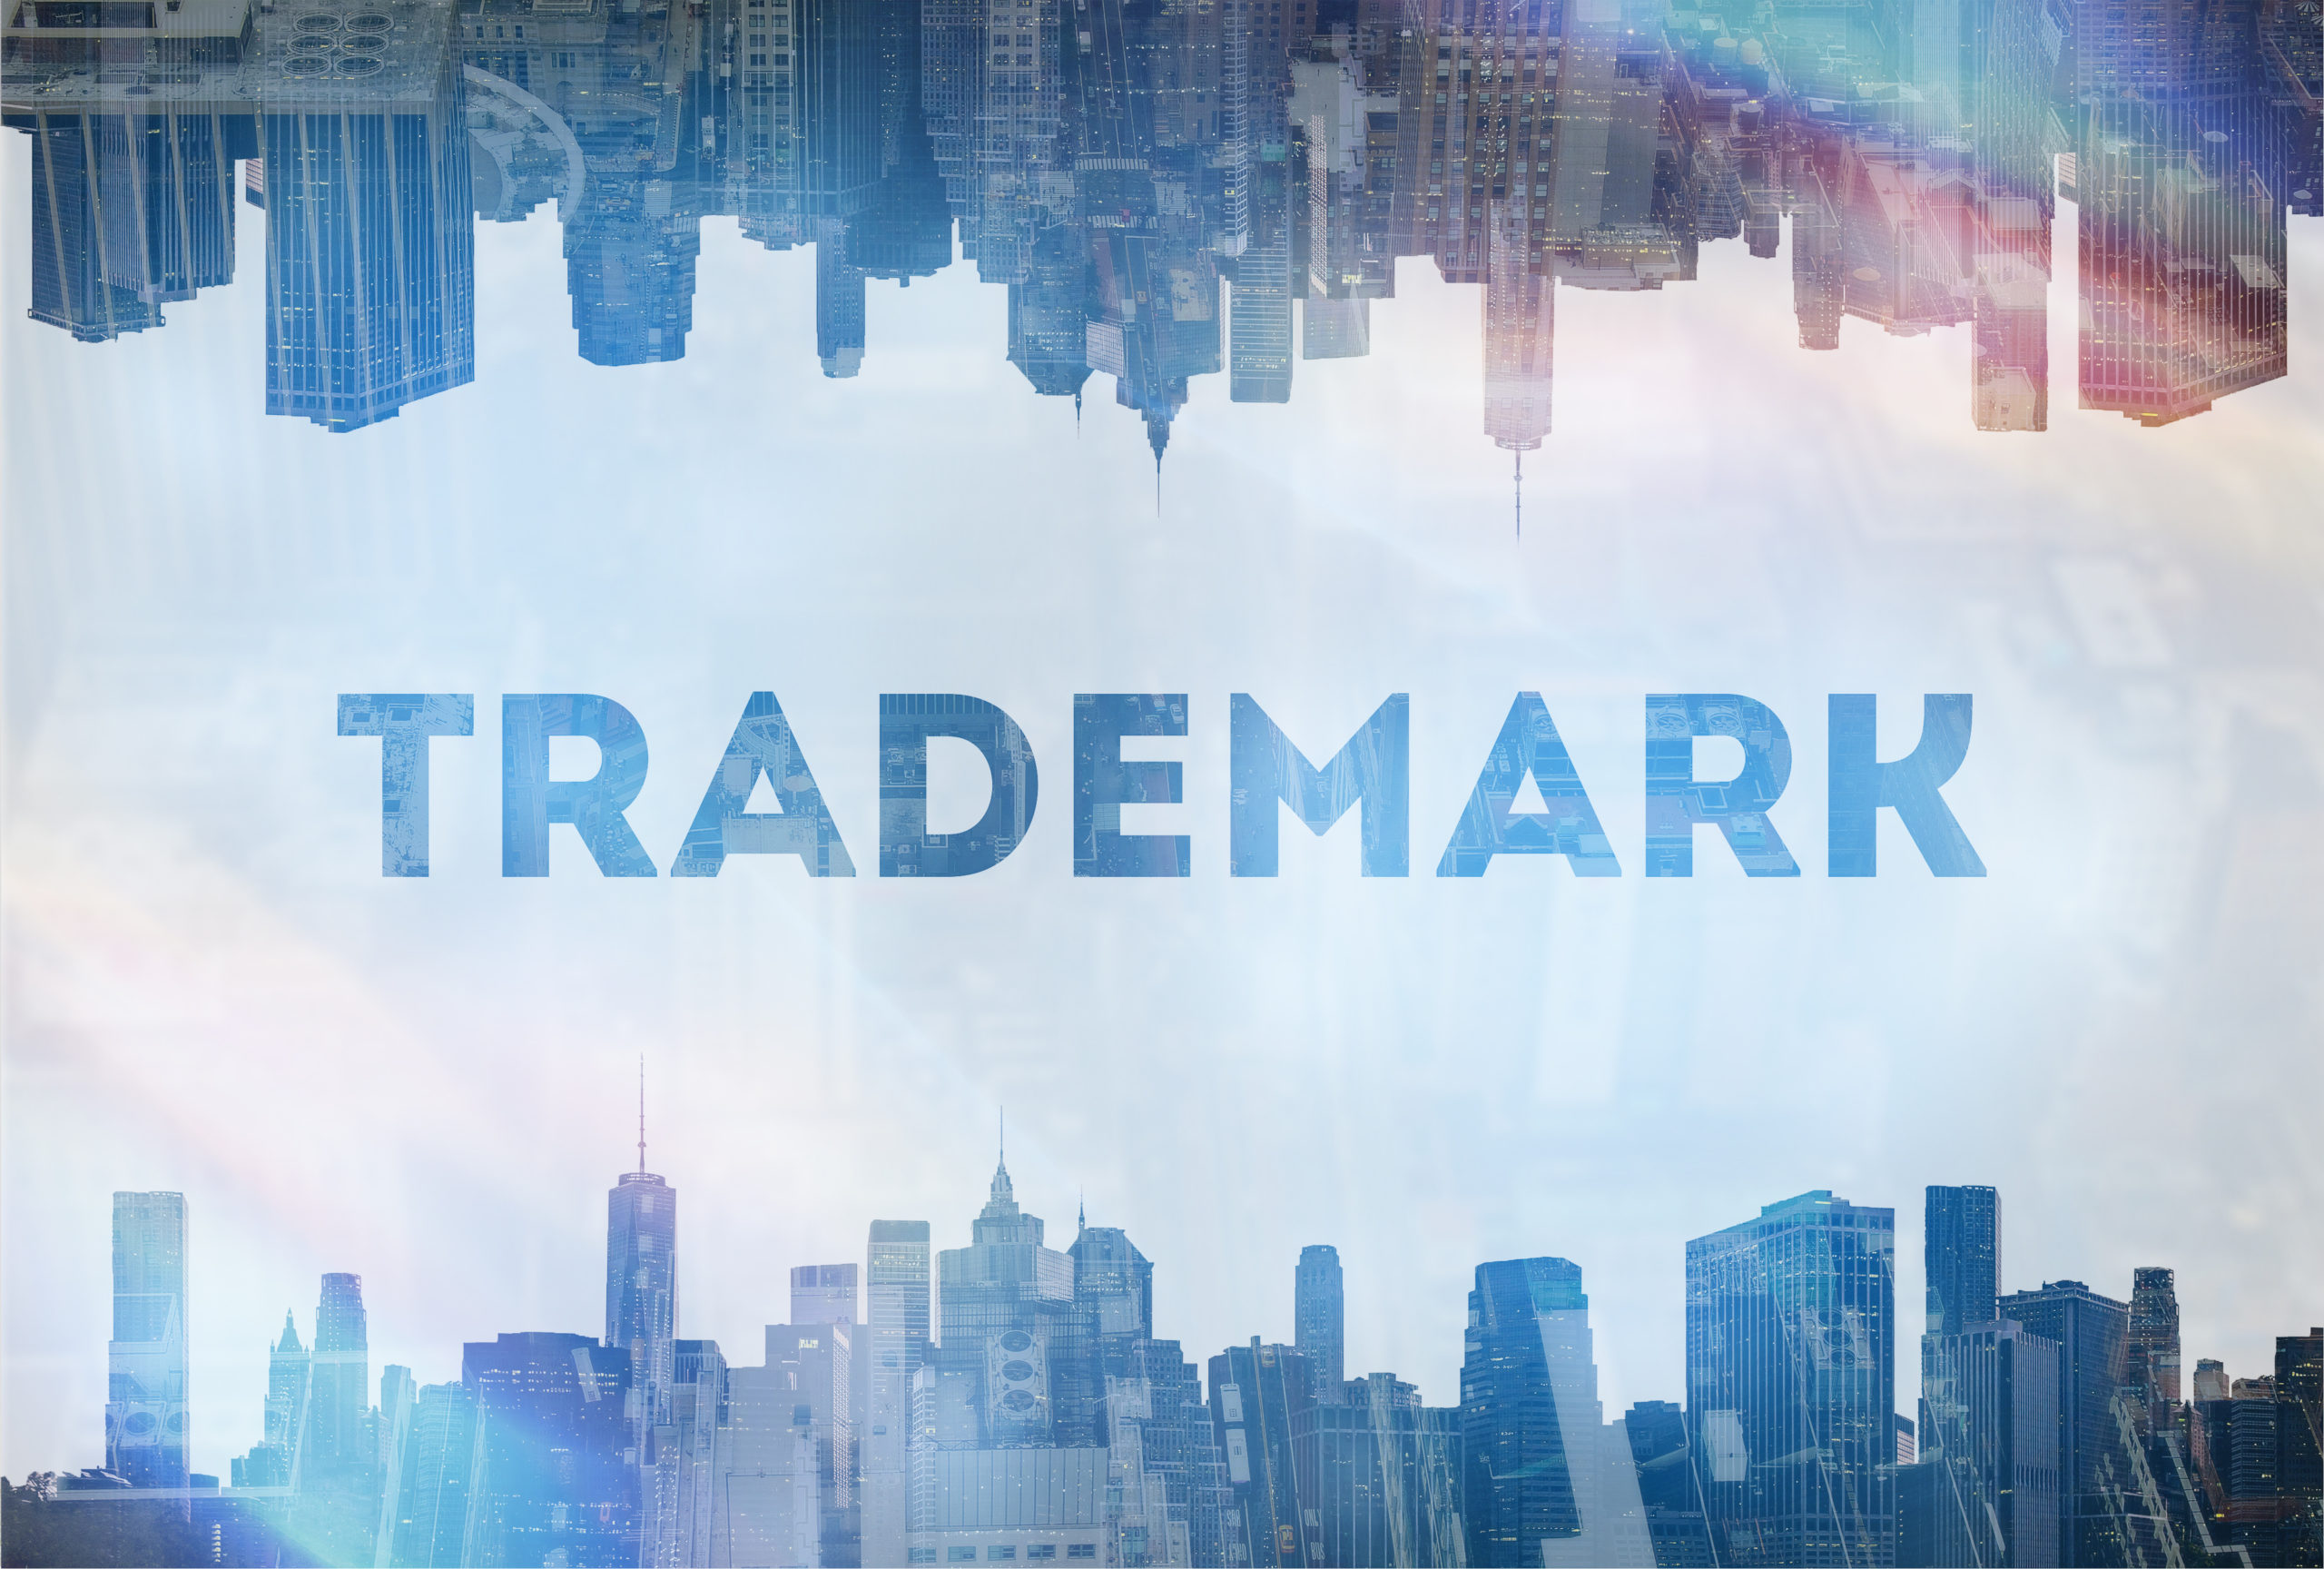 Trademarks, Intellectuap Property, IP, The Moster Law Firm